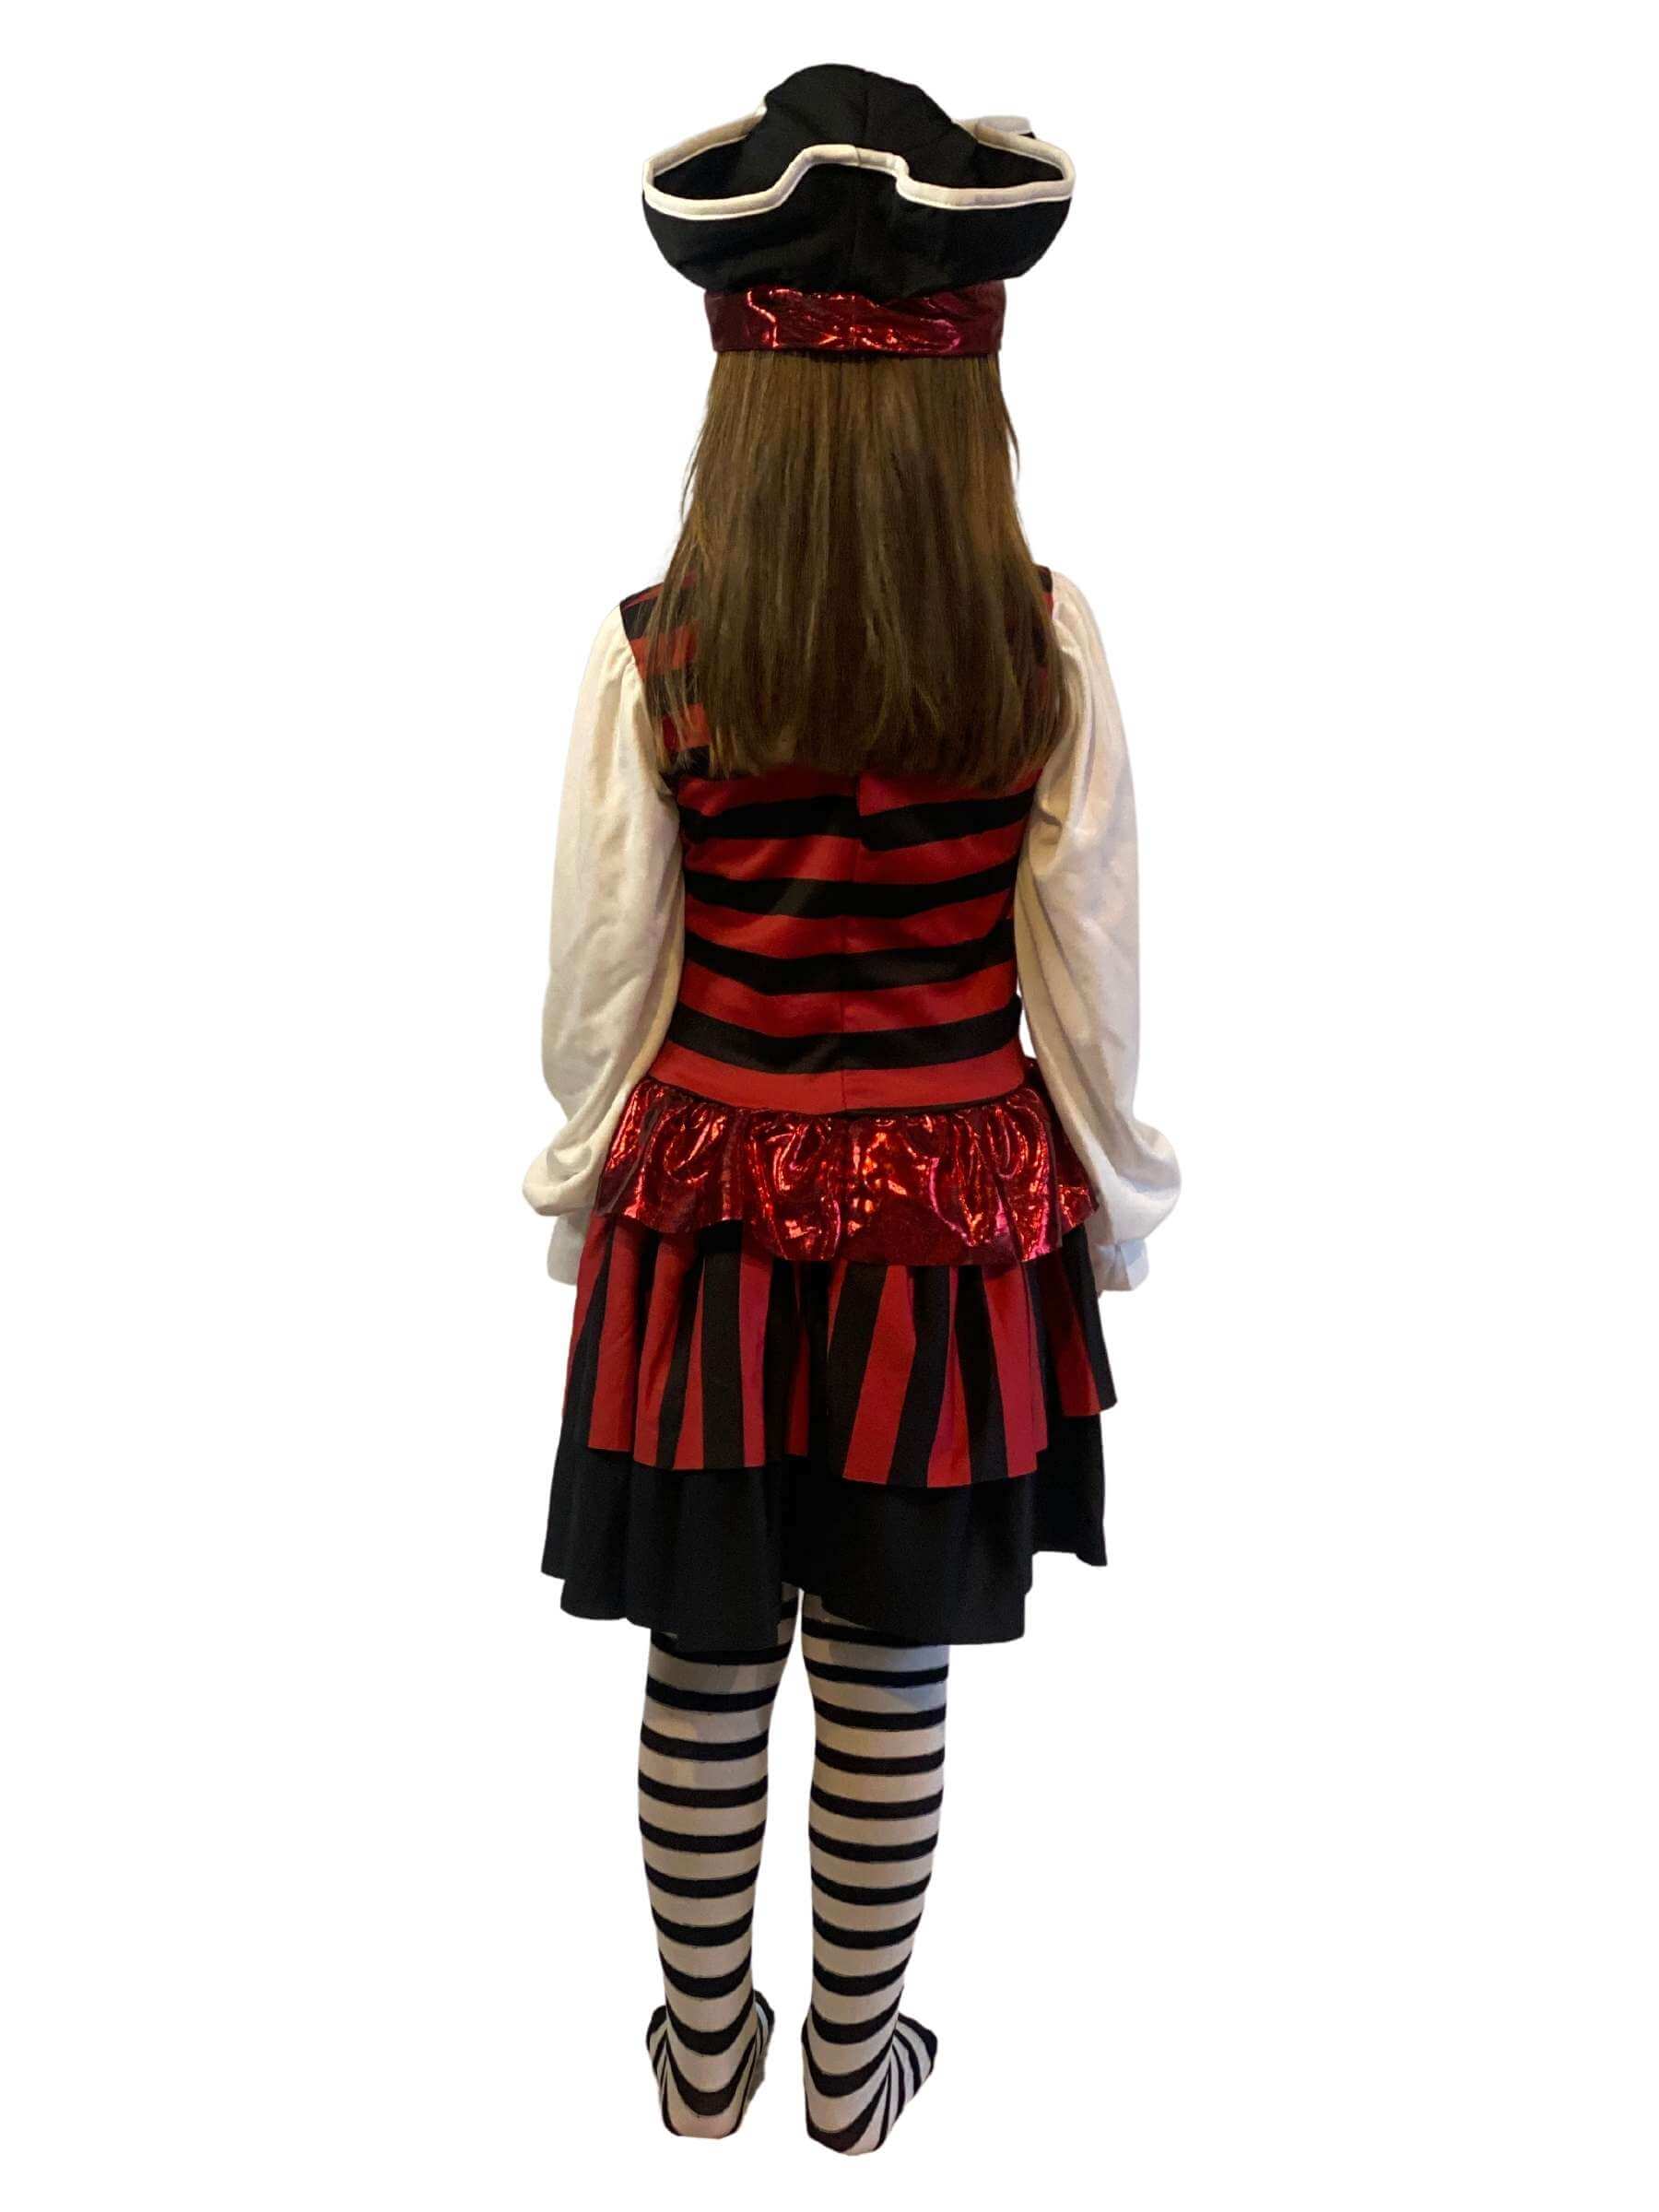 Showing the back of a girl wearing a black and red striped pirate dress with black and white tight and a fabric pirate hat.